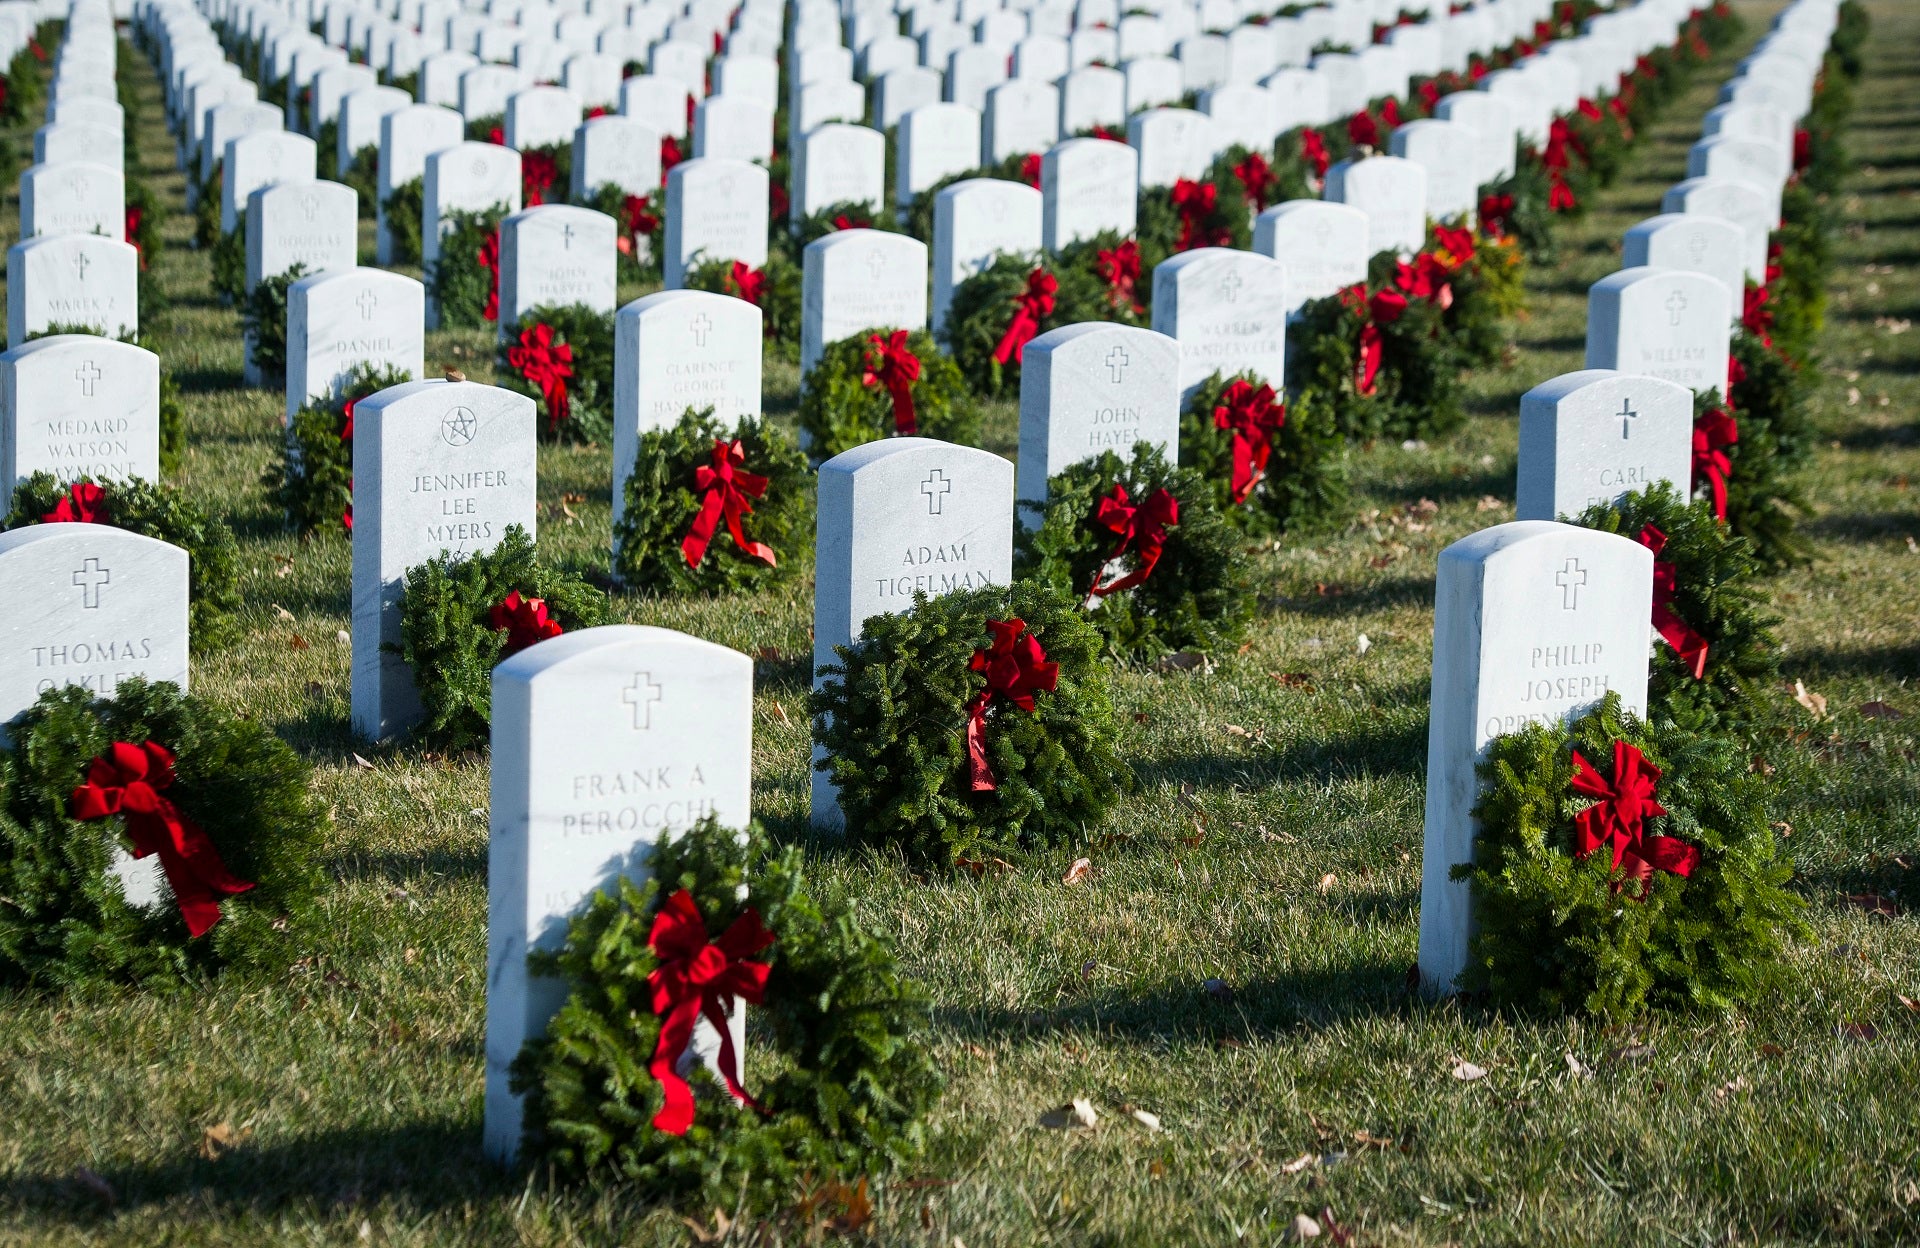 Wreaths Across America brings people together, deserves support not derision